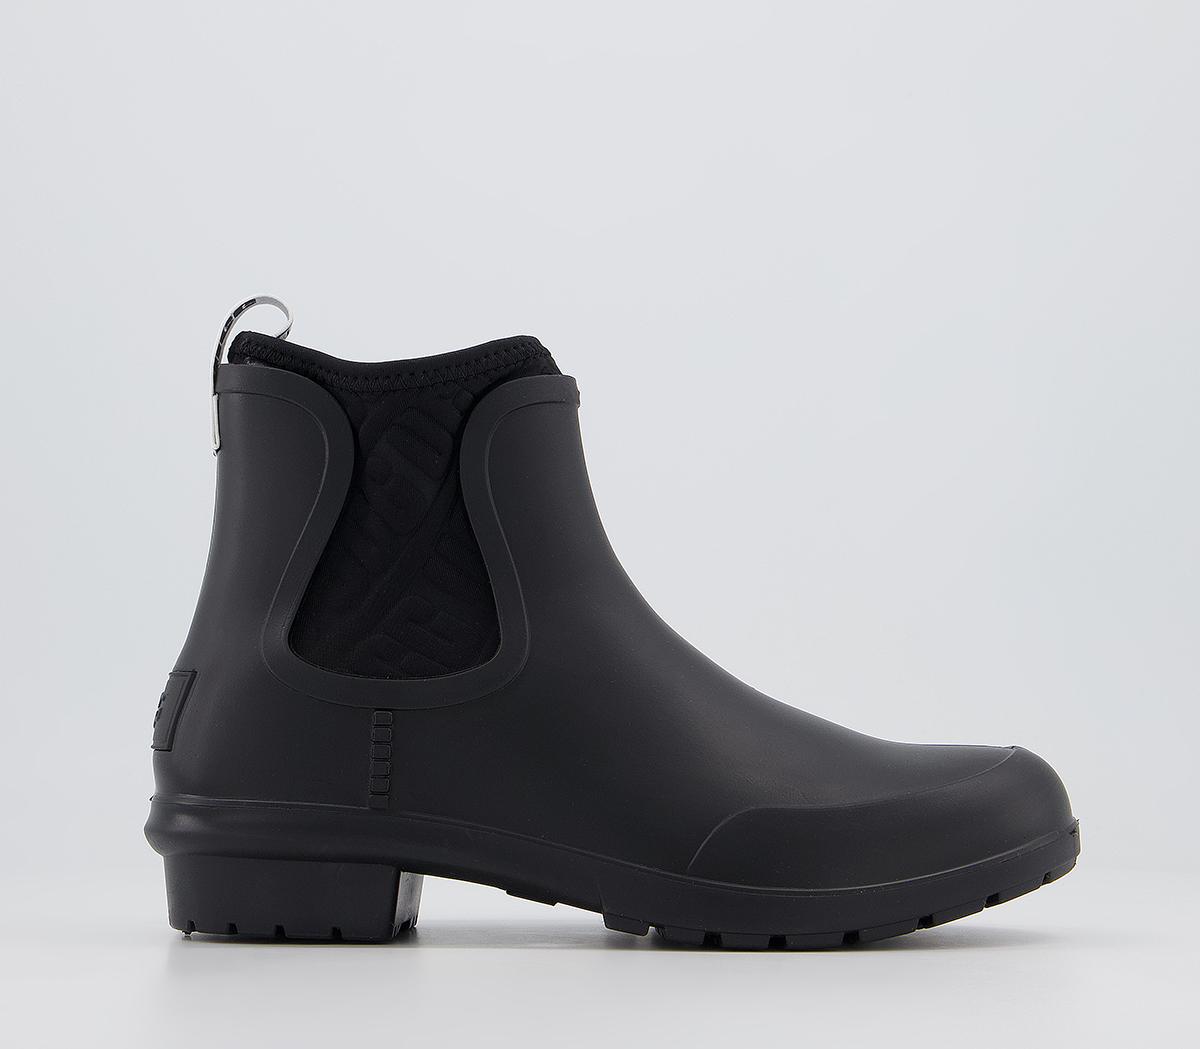 UGG Chevonne Welly Chelsea Boots Black - Ankle Boots